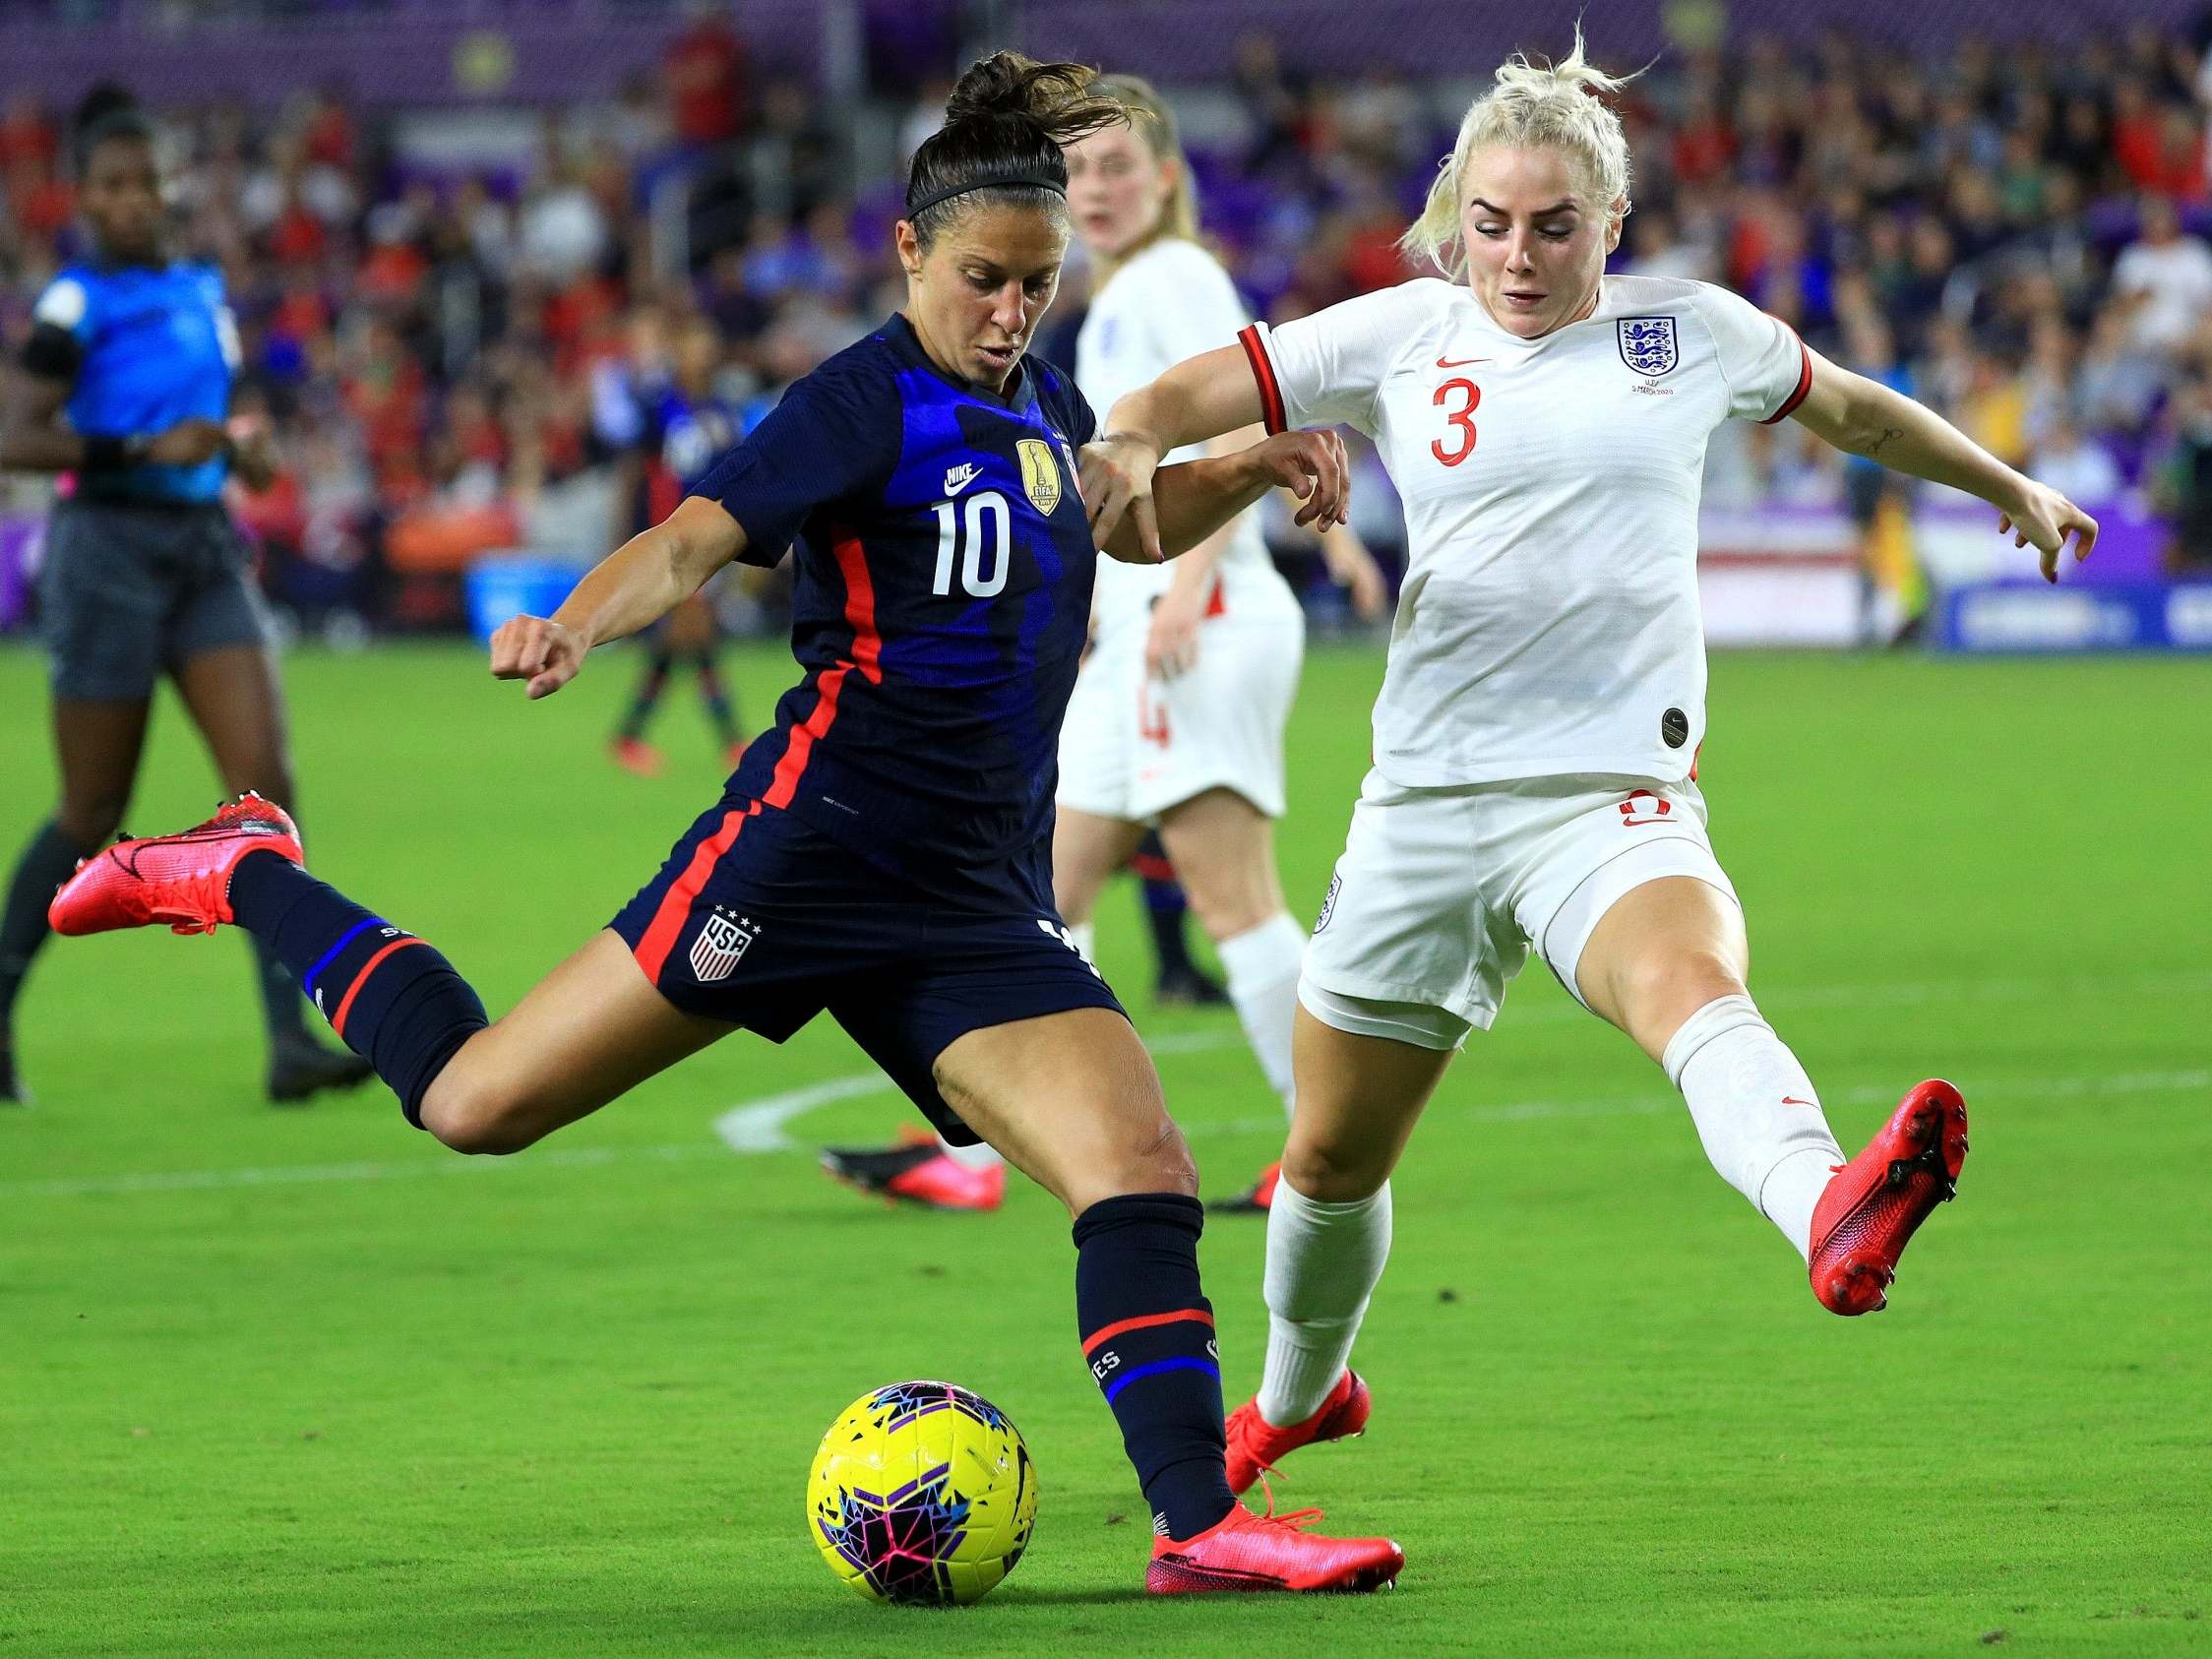 Carli Lloyd sealed victory for the USA with their second goal